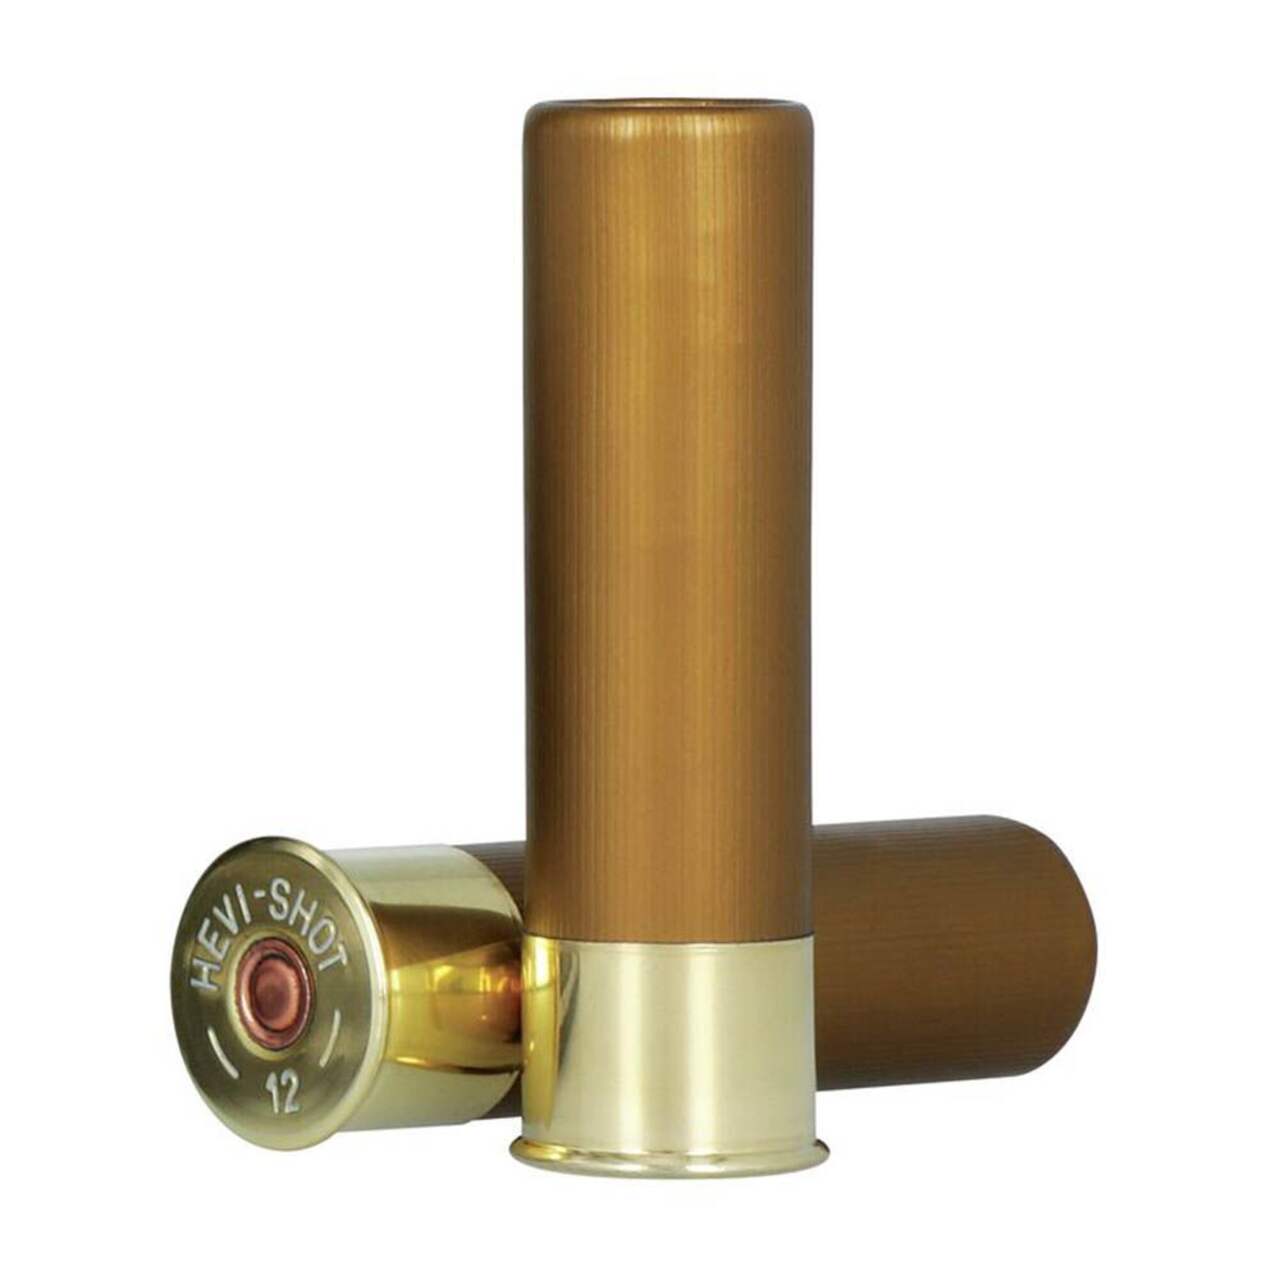 https://media-www.canadiantire.ca/product/playing/hunting/ammunition/1751861/hevi-steel-12-ga-3-5-in-1-375oz-2-shot-25-box-3a87098e-92a9-4787-8f89-491557482384-jpgrendition.jpg?imdensity=1&imwidth=1244&impolicy=mZoom